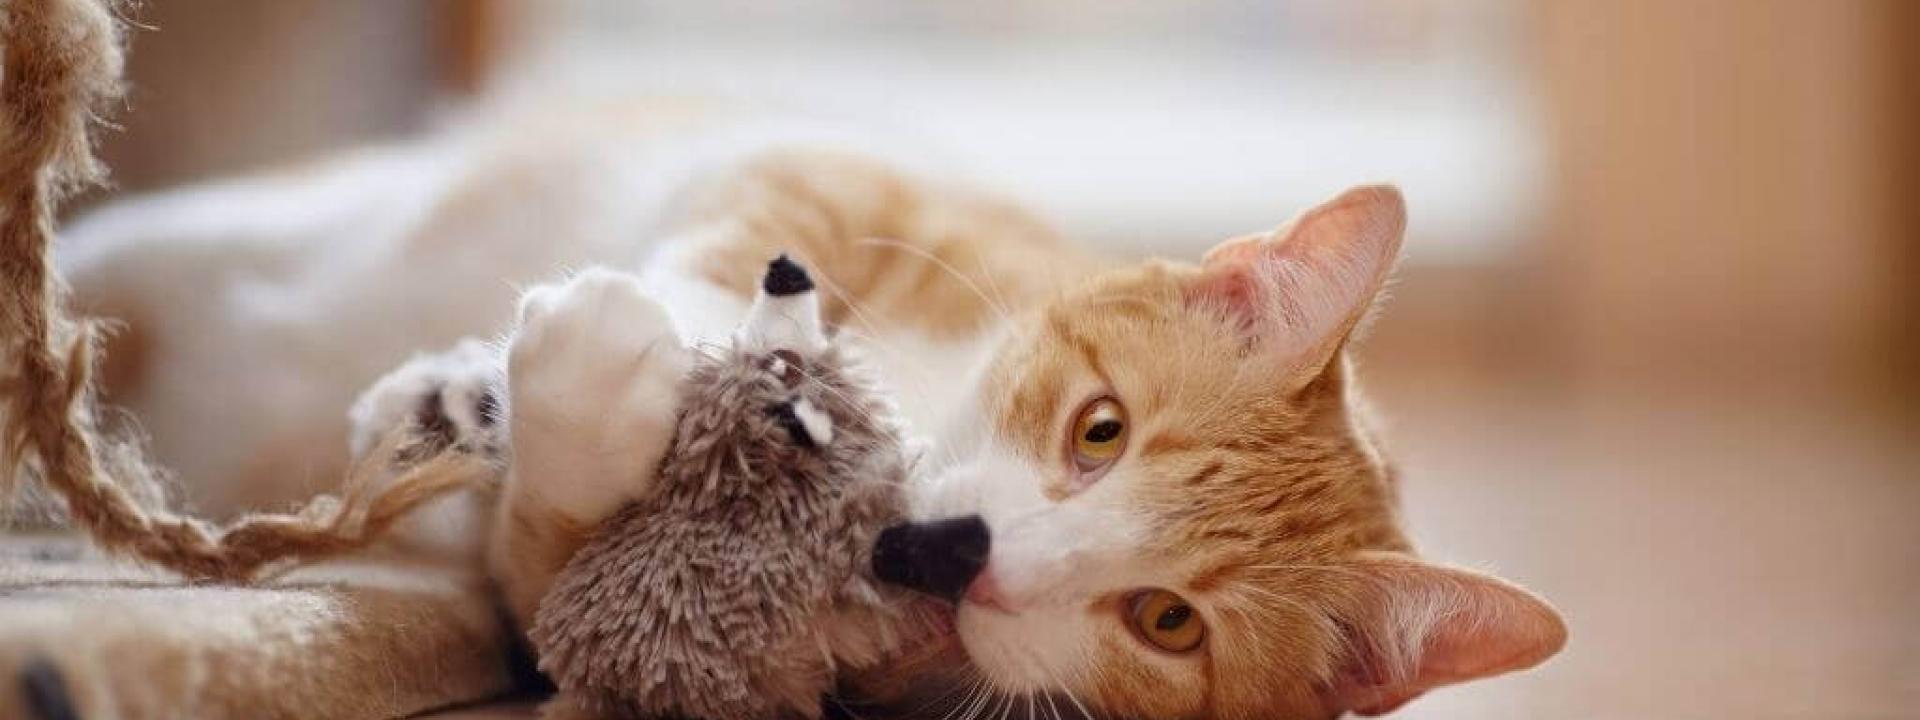 safe and fun holiday toys for cats